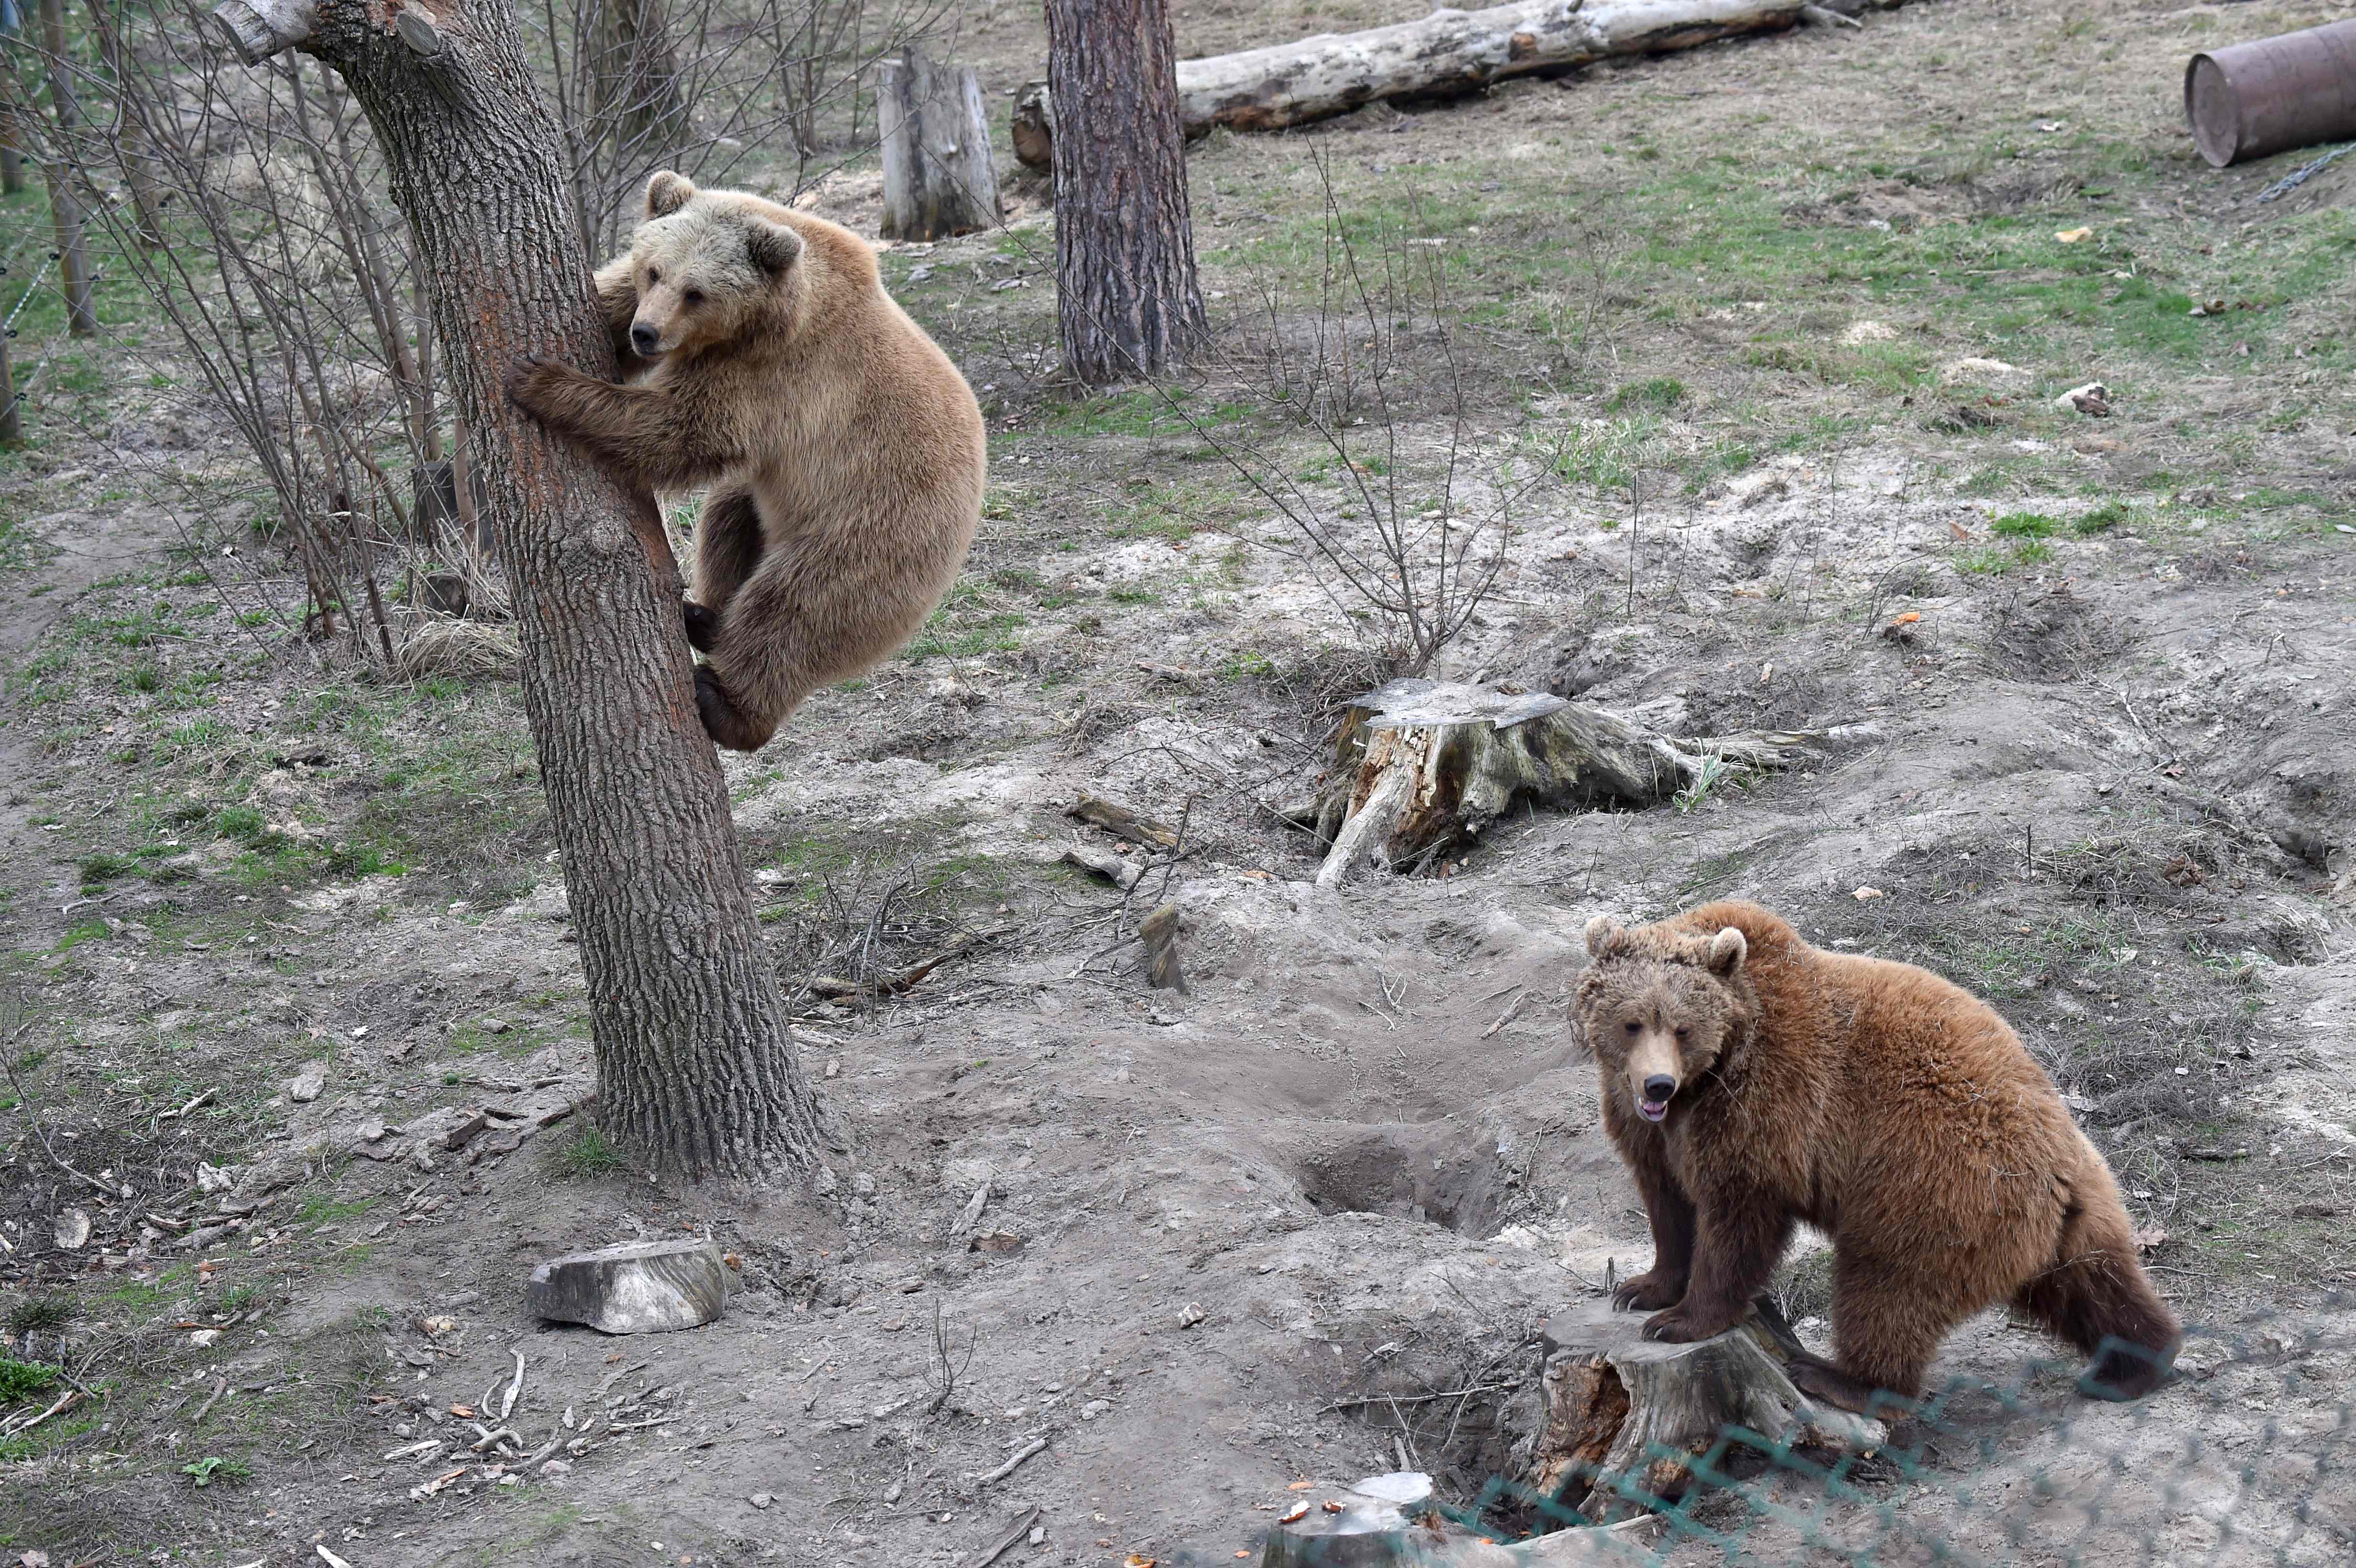 Brown bears play together in a shelter for bears rescued from circuses and private restaurants of Ukraine, near Zhytomyr, some 150 km west of Kiev, on March 24, 2017. Tortured for years by human hands these mighty animals got a chance to start it all over again in a shelter near the city of Zhytomyr, in the northwest of the country. Opened in 2012 by international animal charity Four Paws, the rescue centre soon became one of the biggest sights of the region. / AFP PHOTO / Sergei SUPINSKY